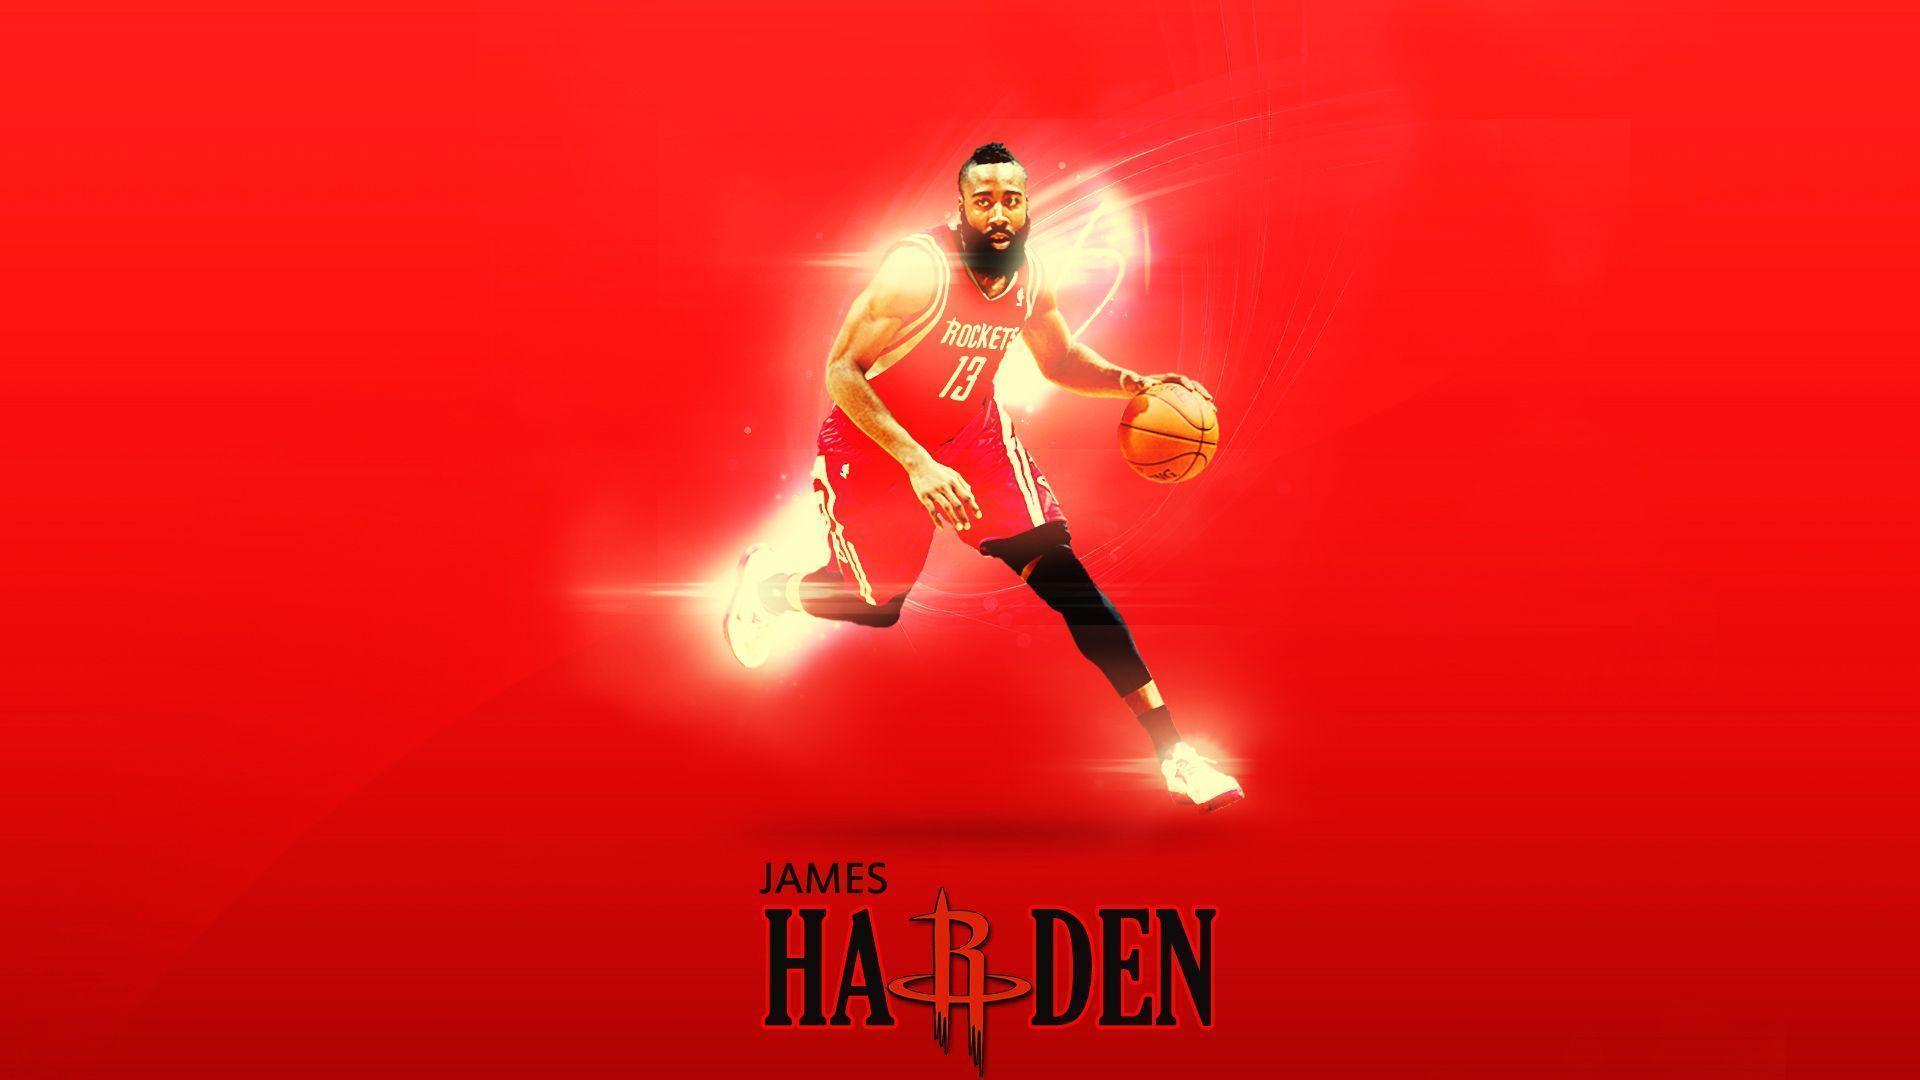 James Harden Wallpaper High Resolution and Quality Download